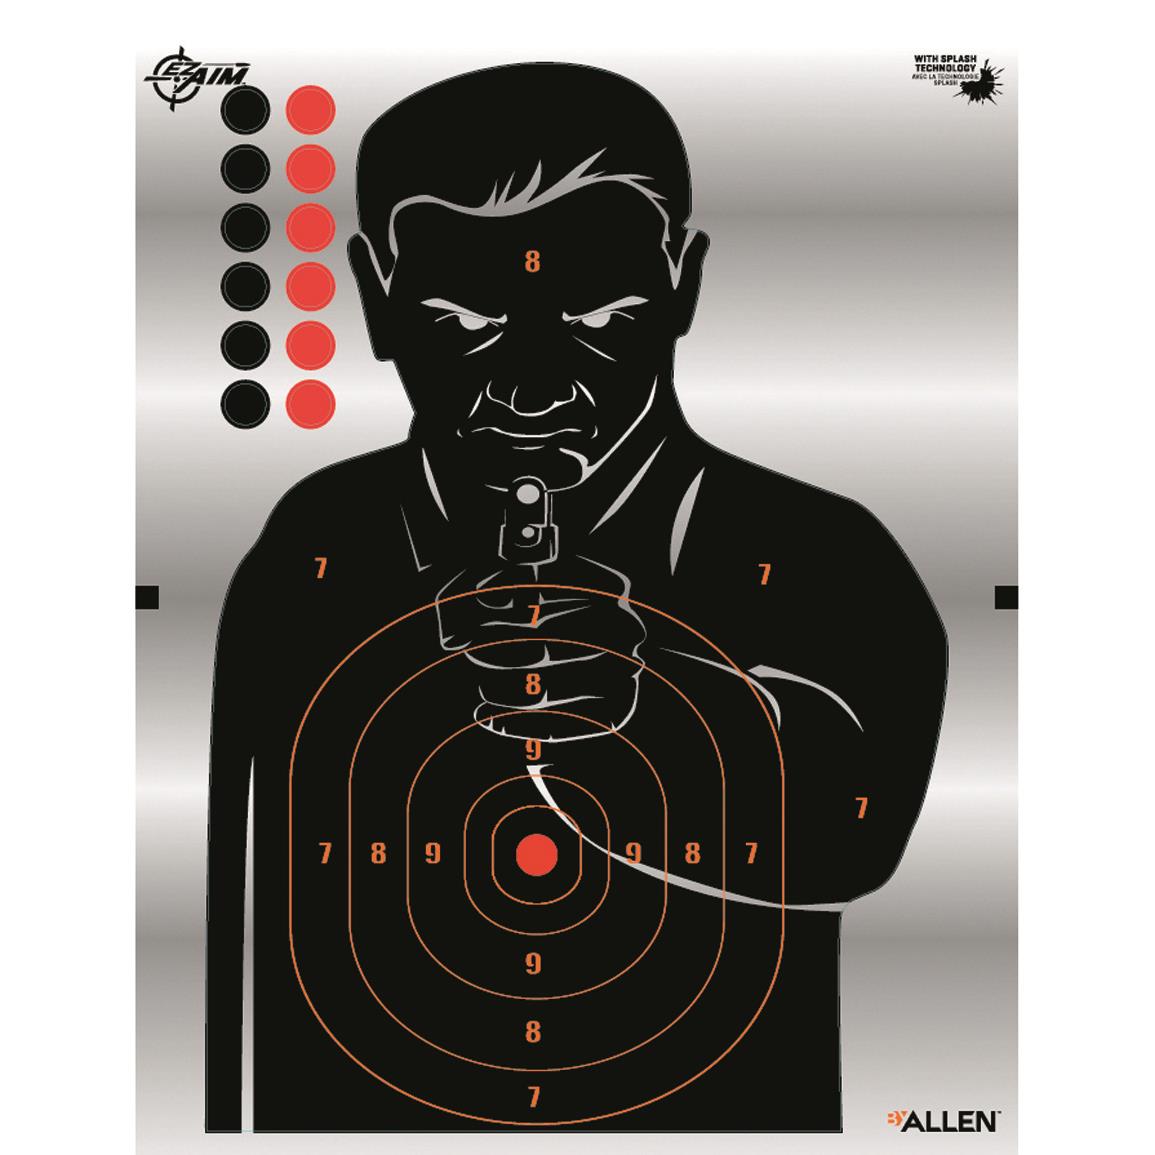 Allen EZ SEE Adhesive Targets Various Sizes Impact Area Shooting Targets 